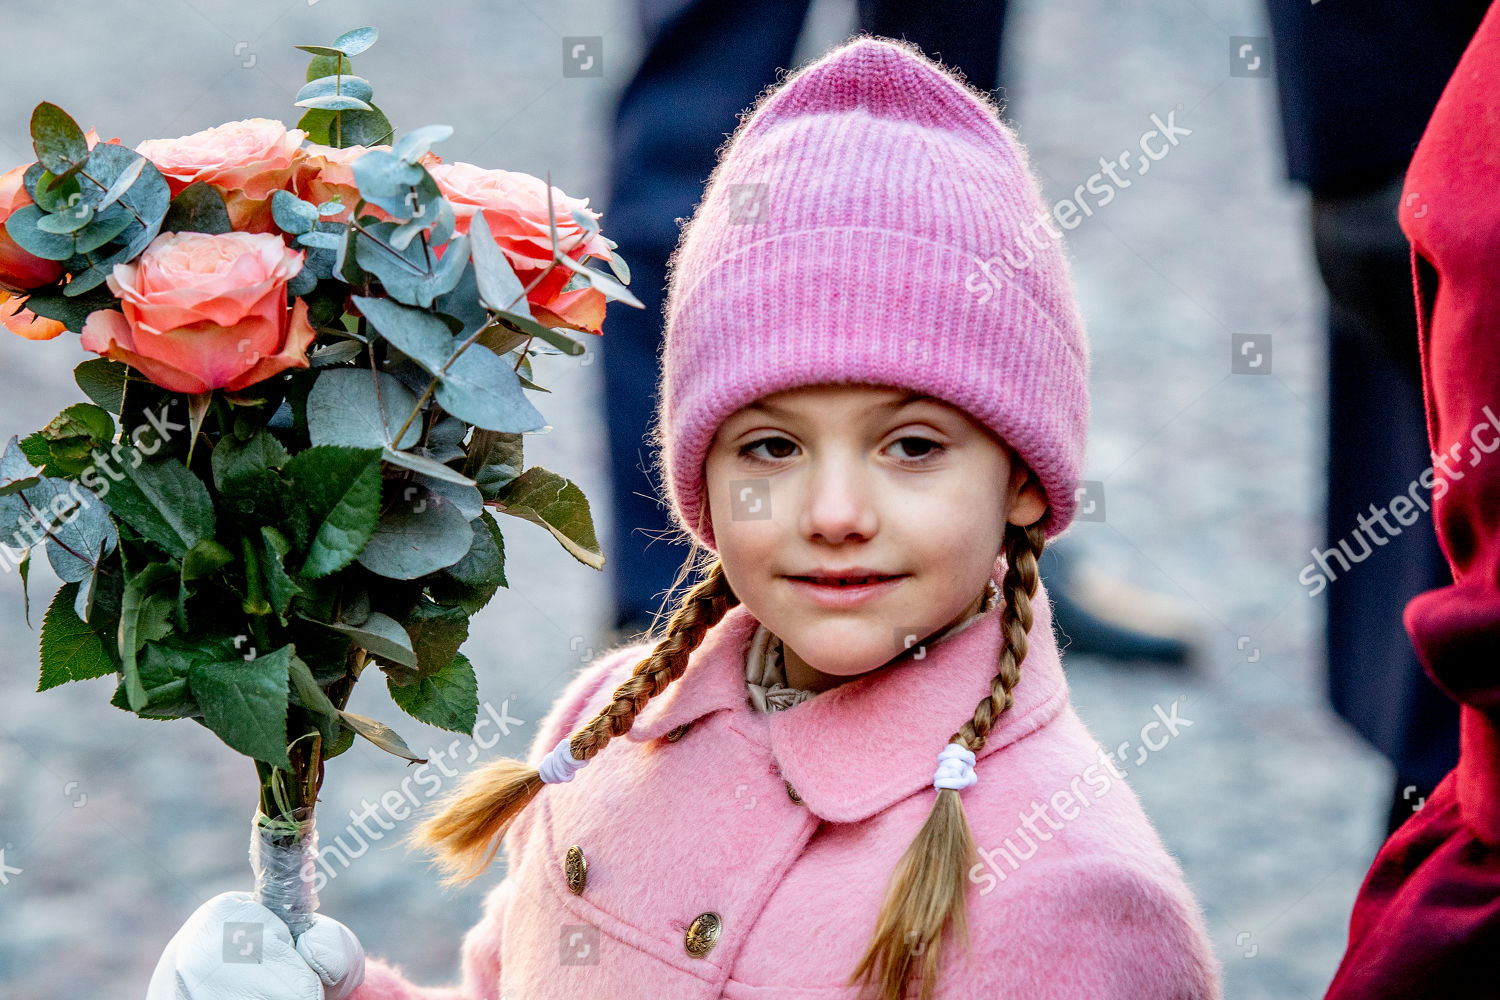 crown-princess-victoria-name-day-celebrations-stockholm-sweden-shutterstock-editorial-10151872aw.jpg